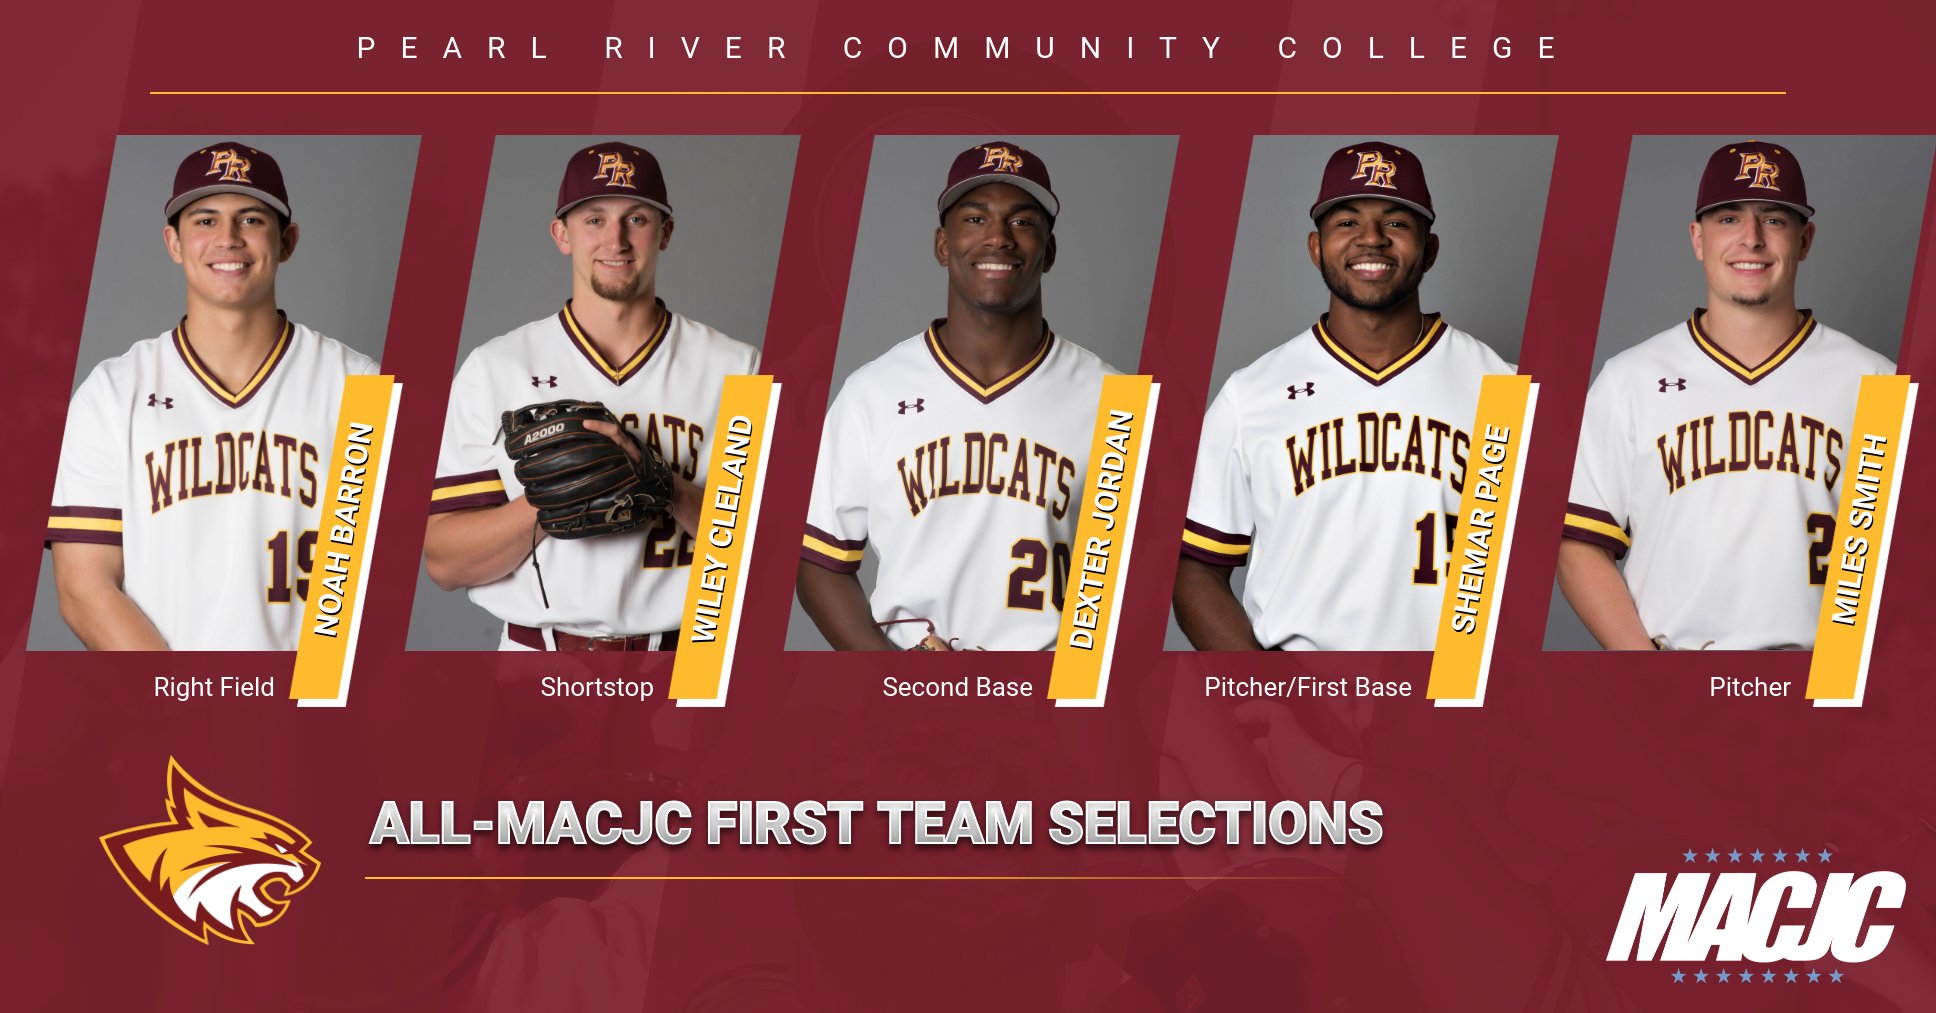 8 Pearl River baseball standouts honored by MACJC